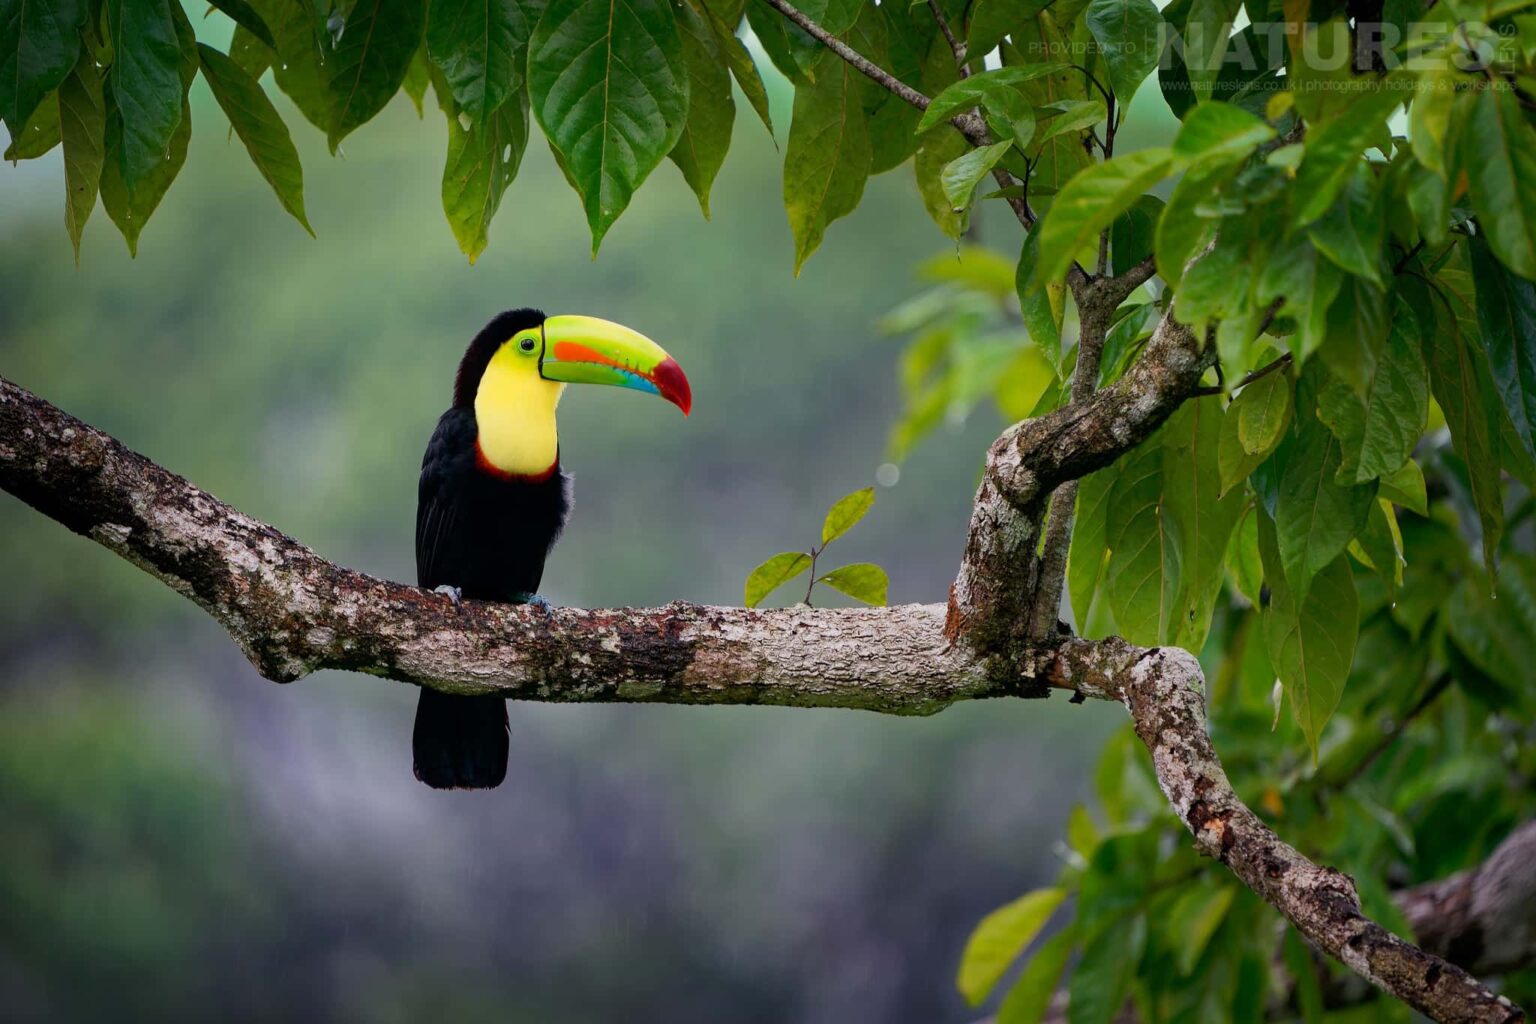 A perched Keel-billed Toucan, one of the icons of Costa Rica - which can be photographed during the NaturesLens Quetzals & Other Iconic Wildlife of Costa Rica photography holiday